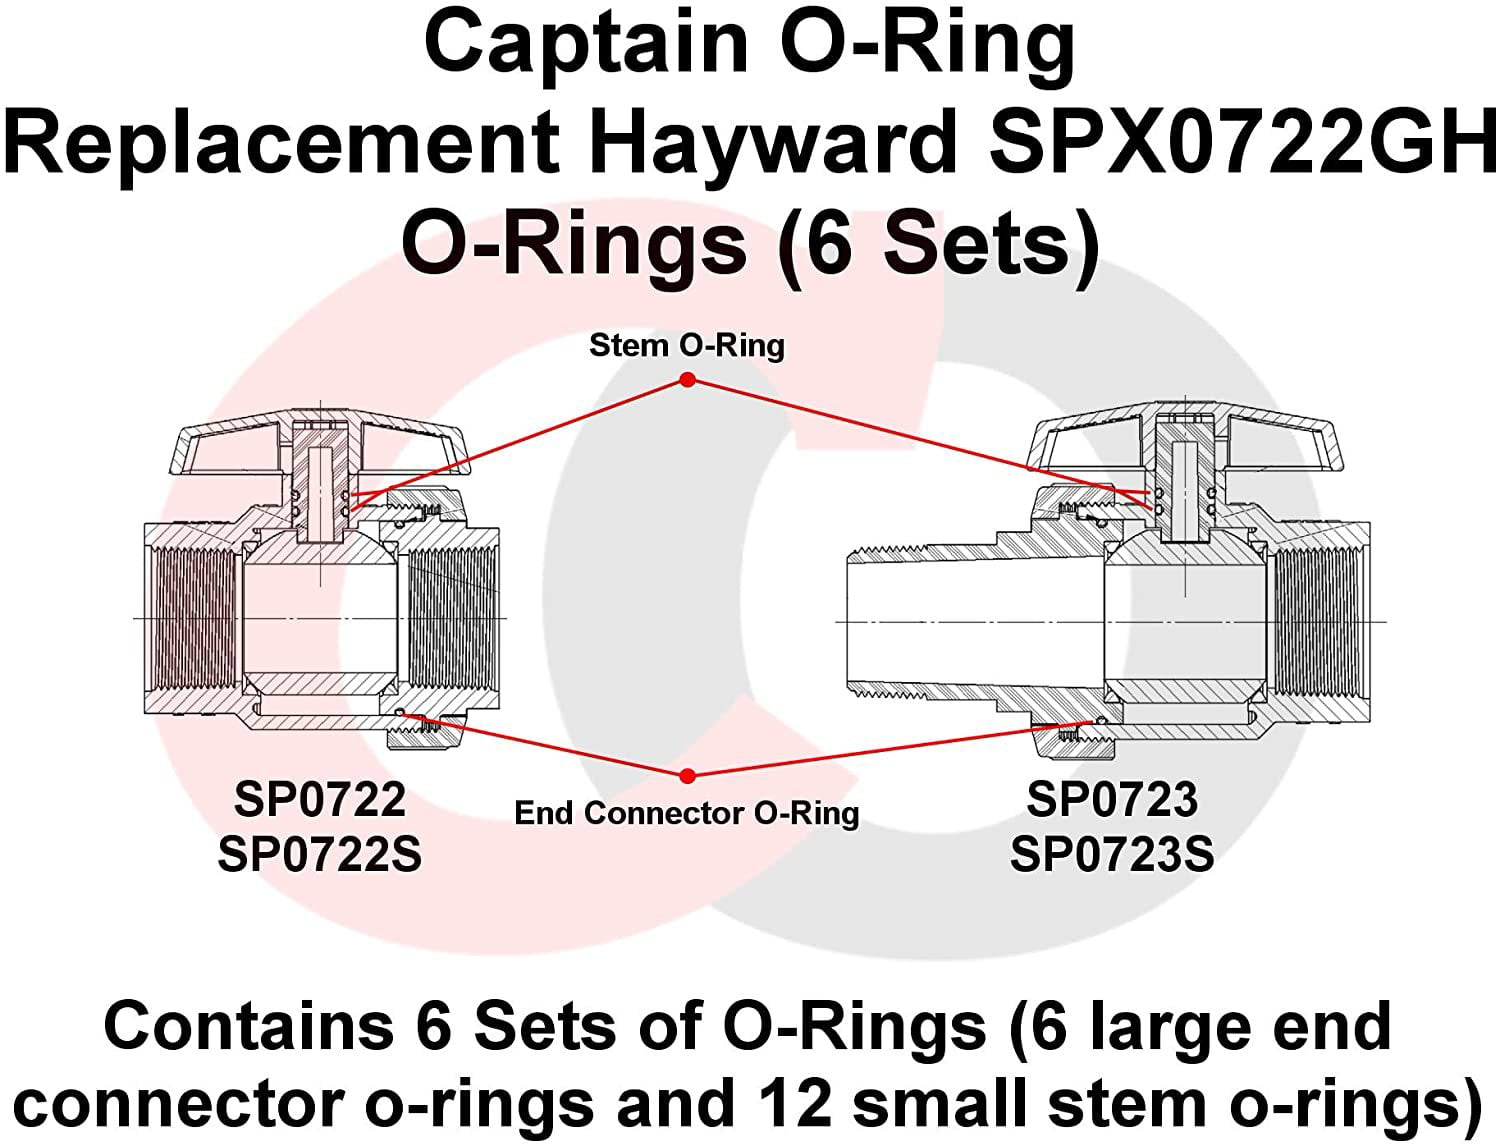 Replacement Hayward SPX0722GH O-Rings for Trimline Ball... Captain O-Ring